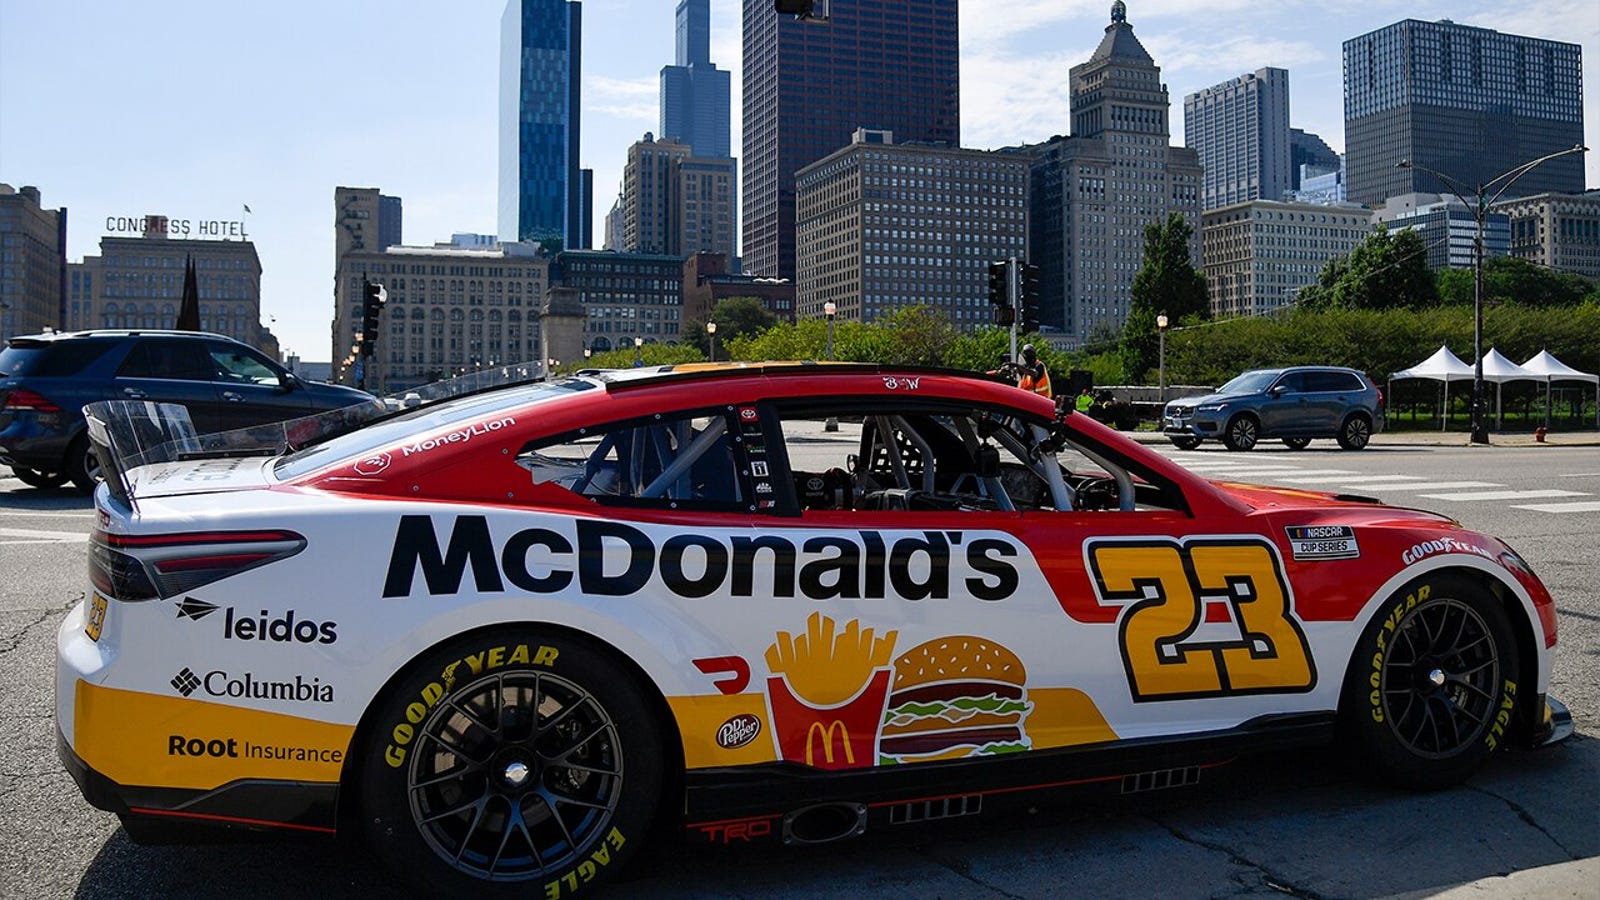 NASCAR announces street racing in Chicago